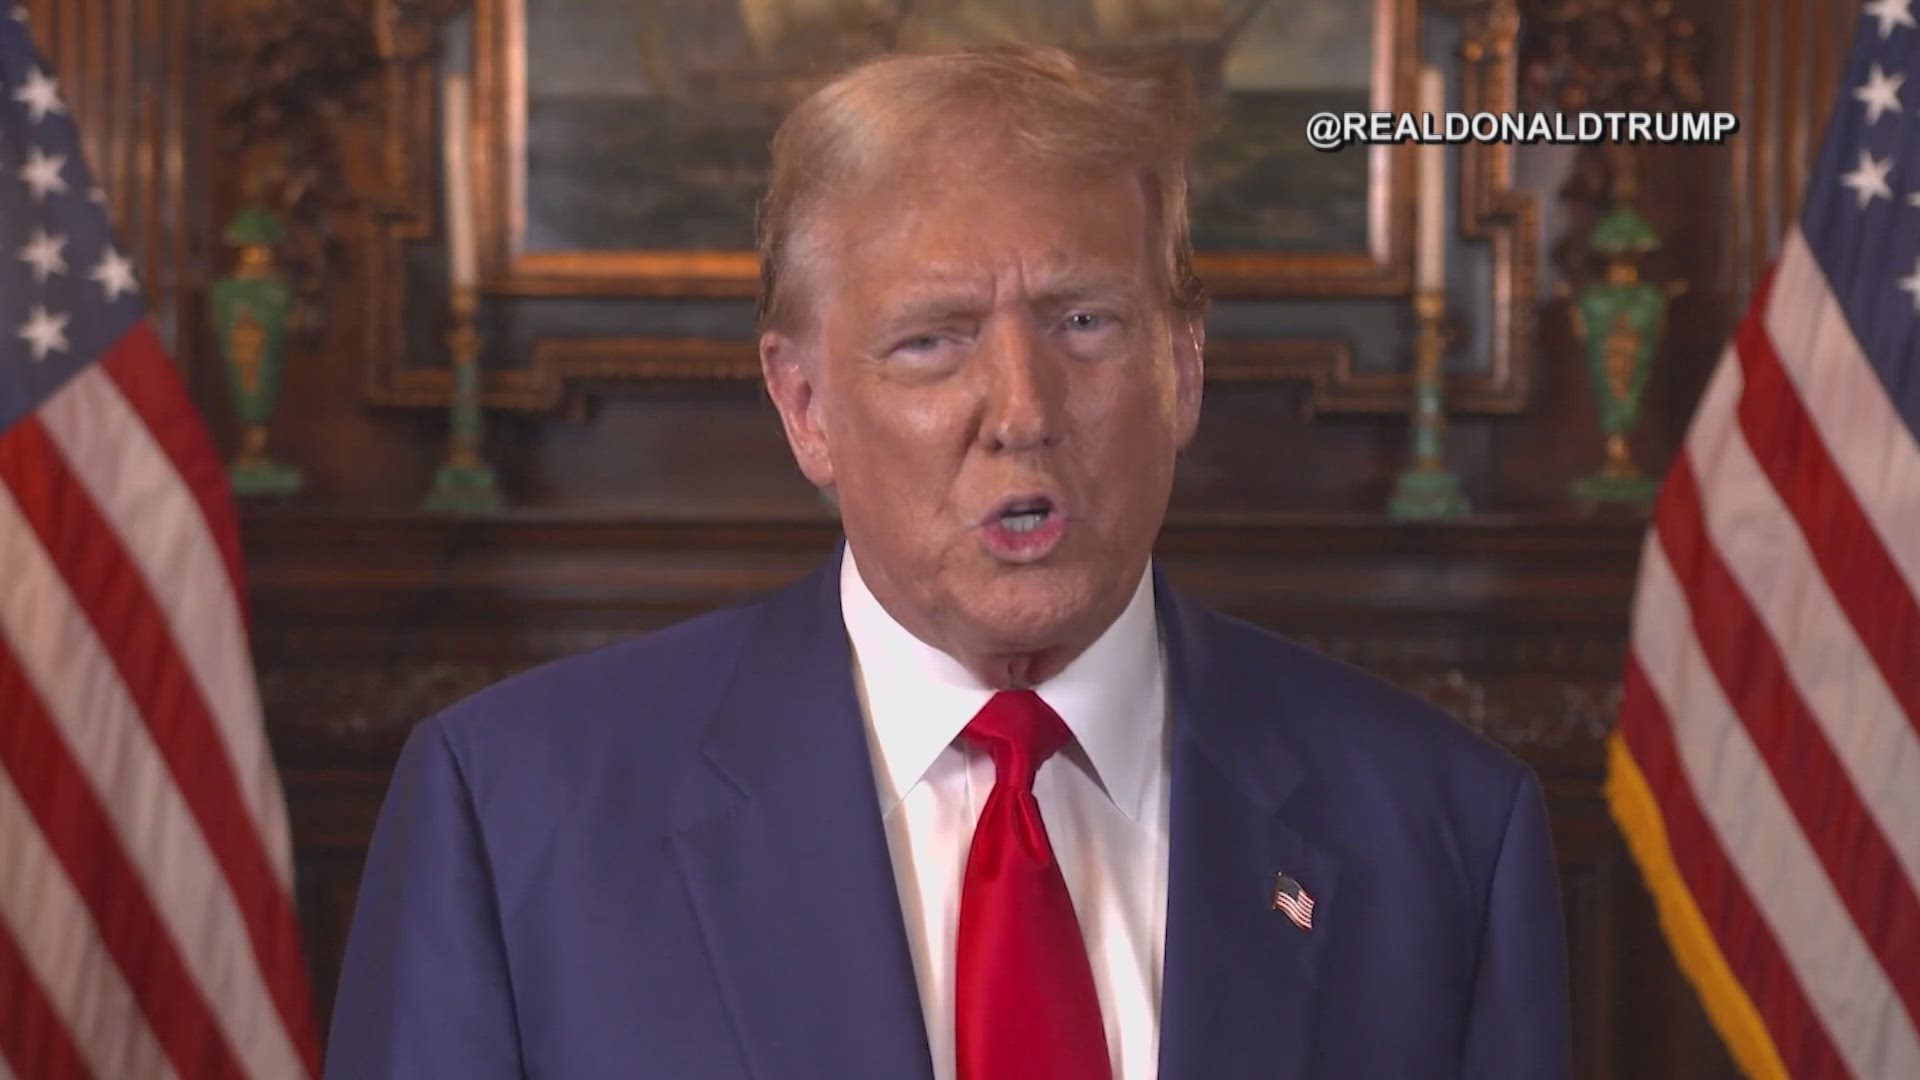 "At the end of the day, this is all about the will of the people," said Trump.